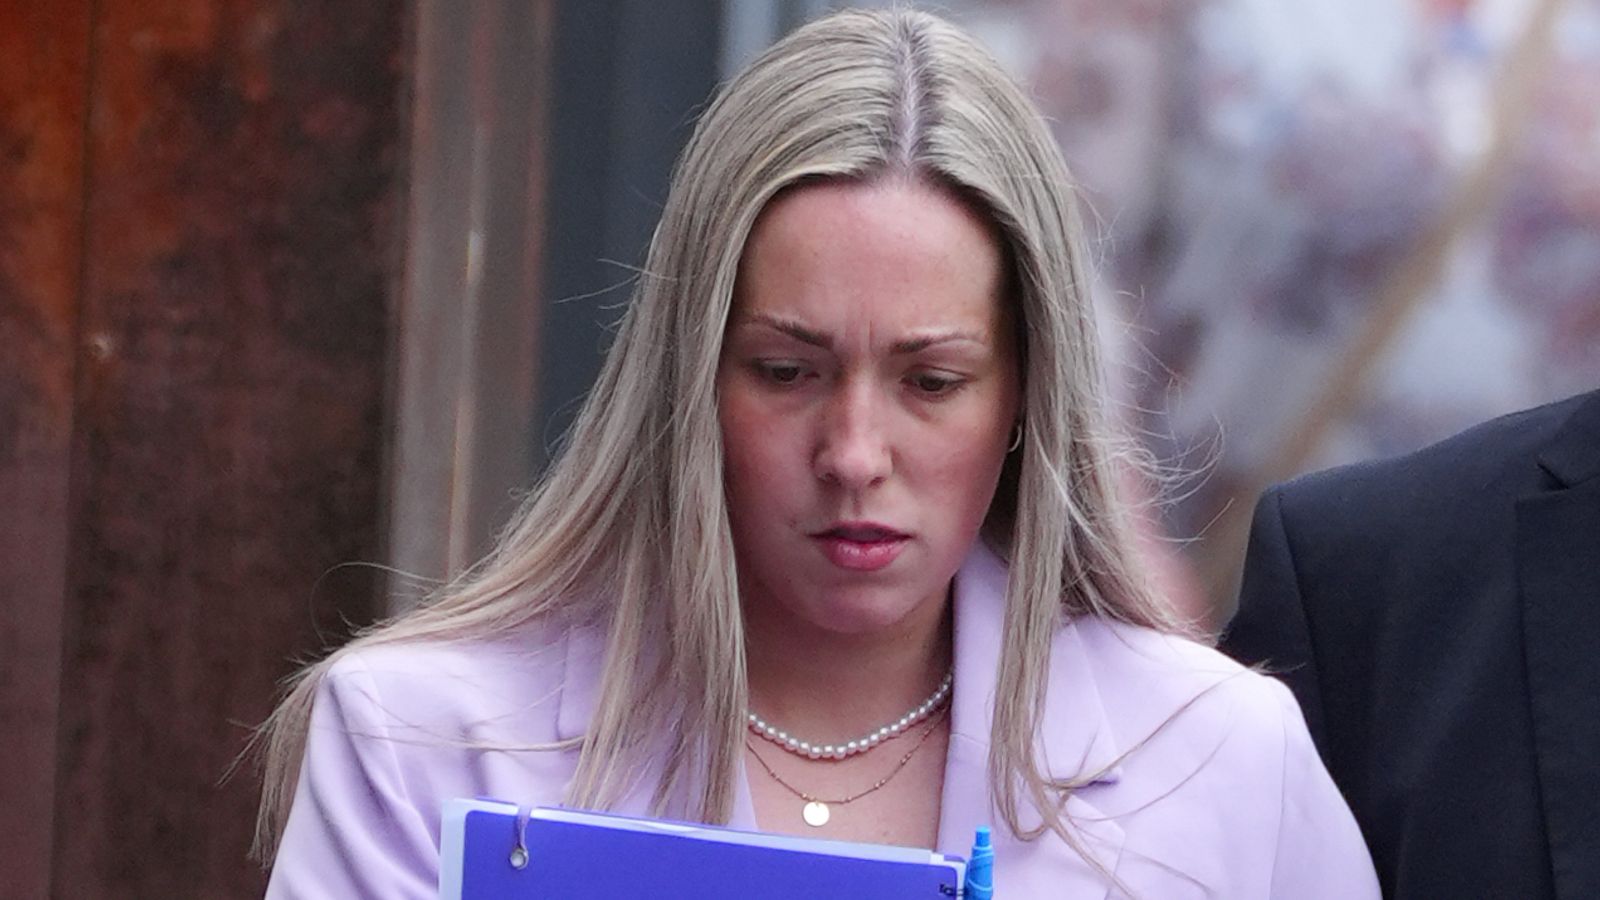 Rebecca Joynes: Teacher found guilty of sexual activity with a child